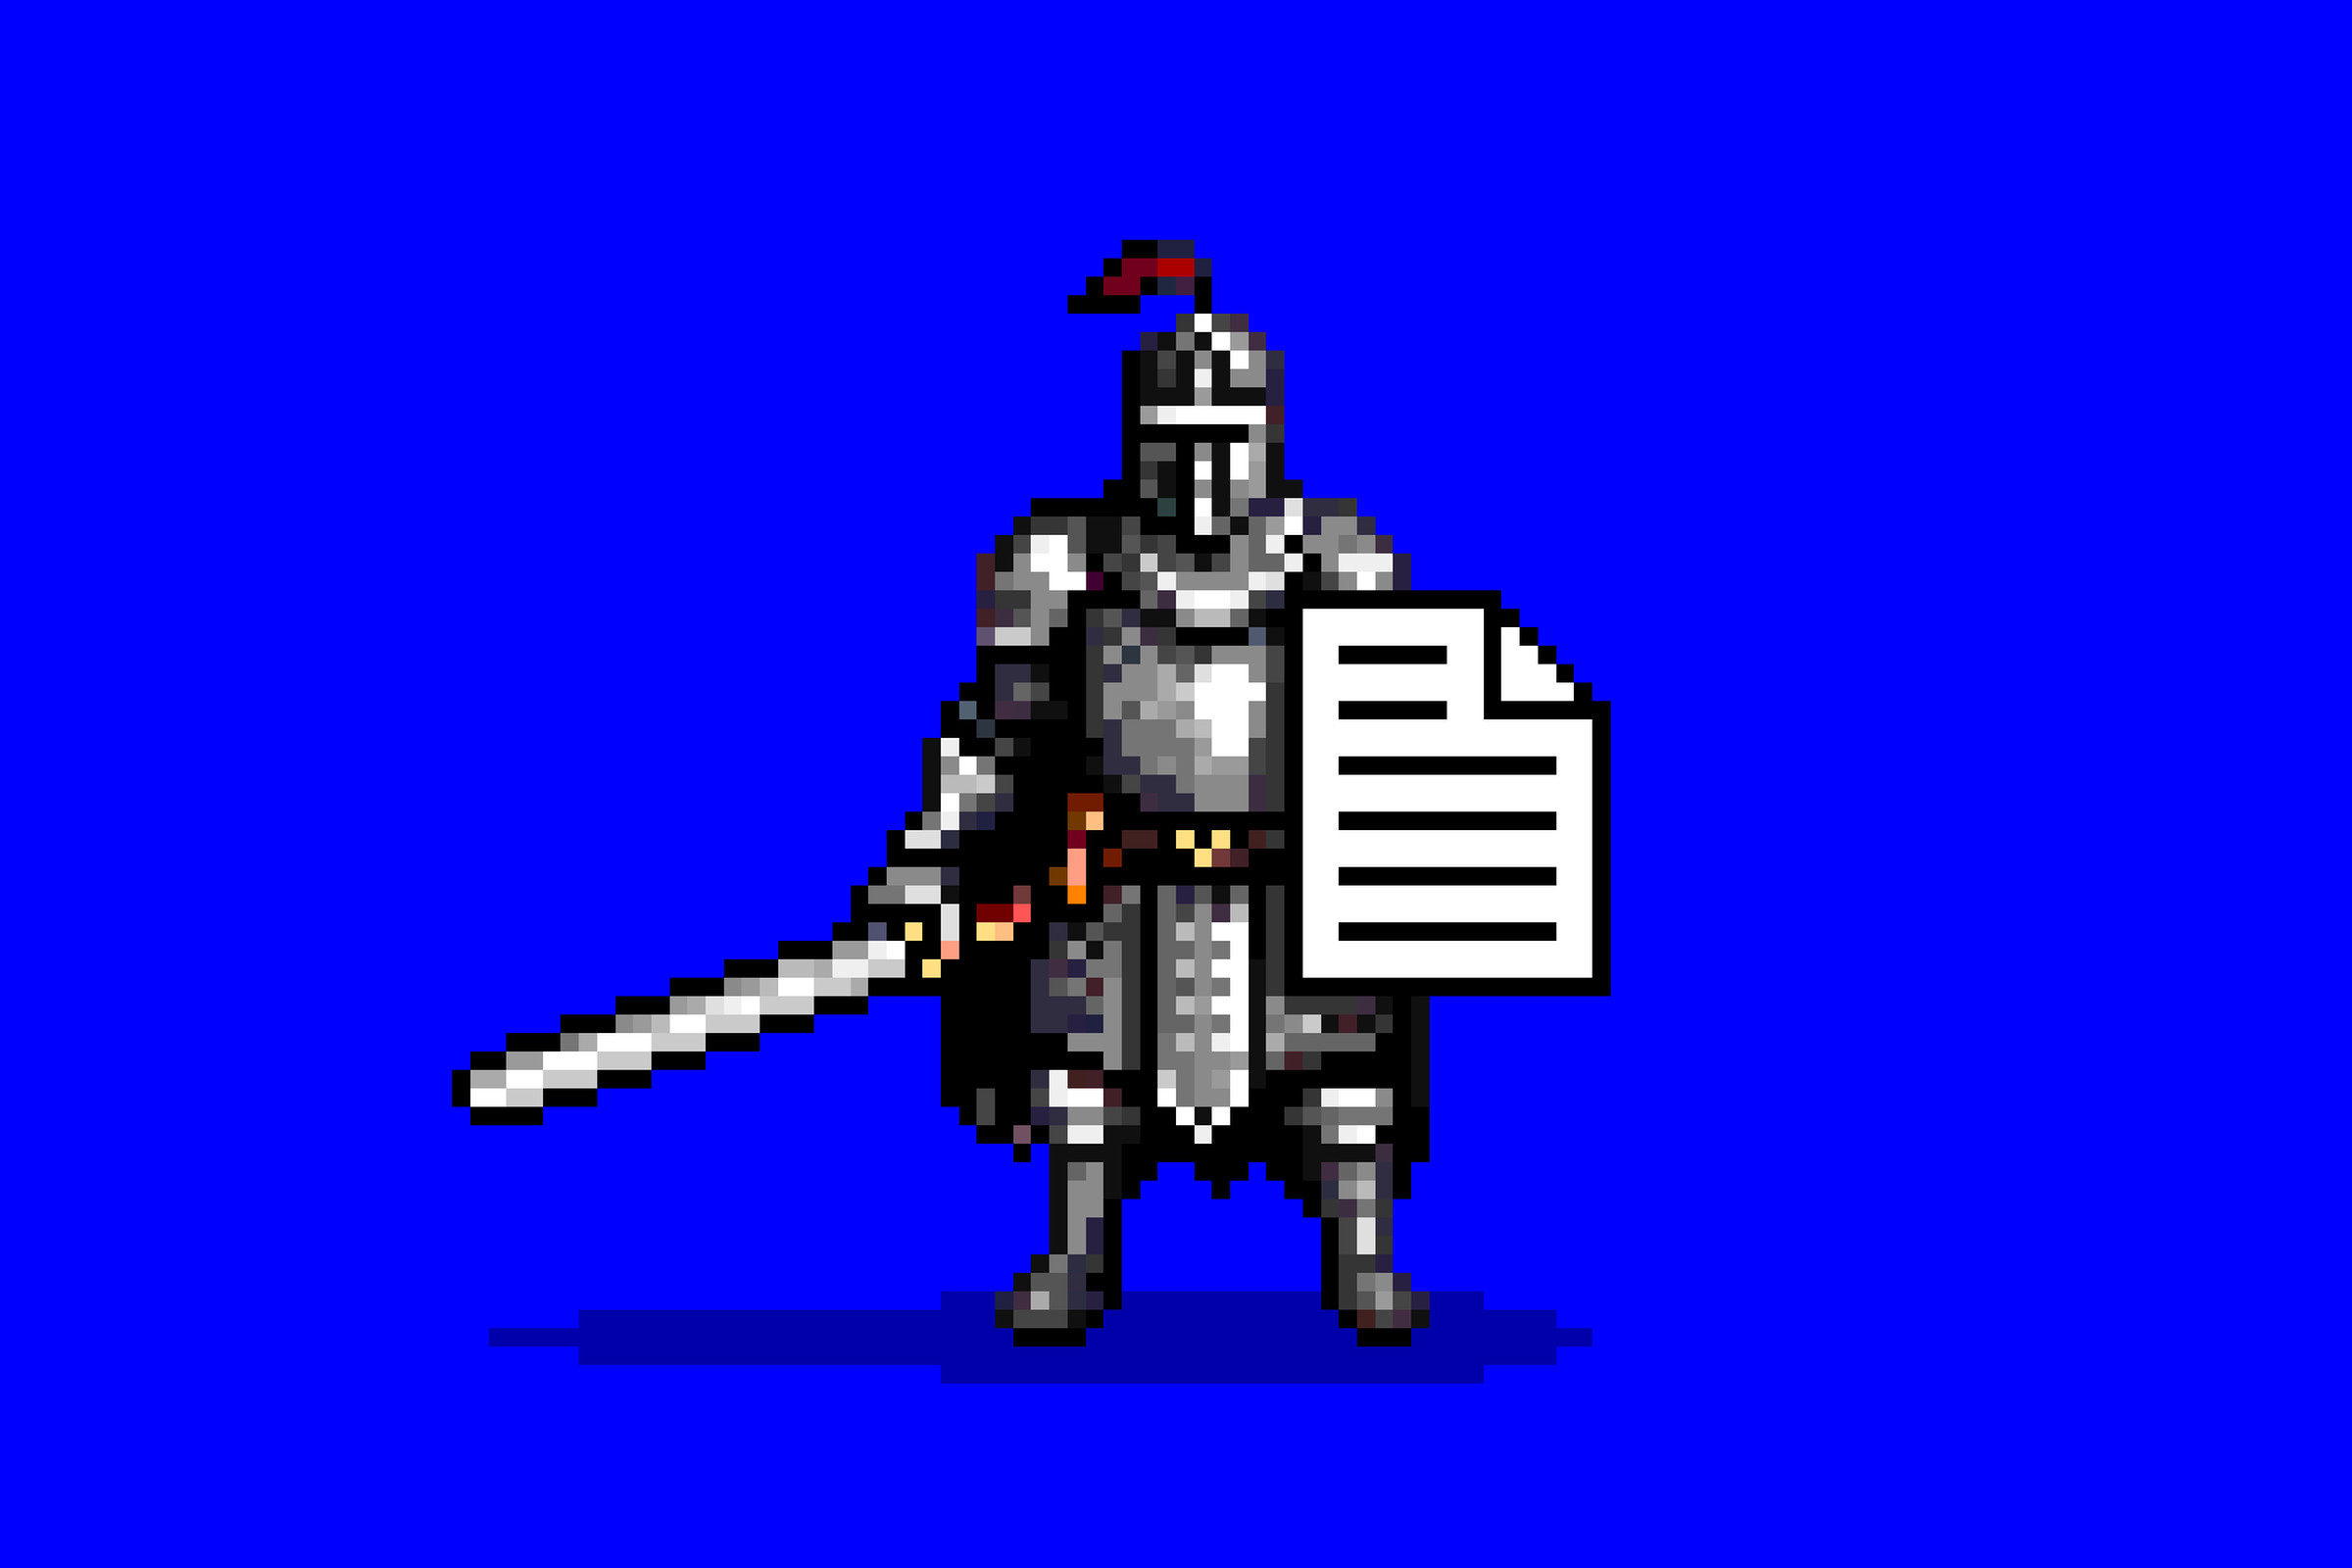 Pixel illustration of a knight holding a text file as a shield.